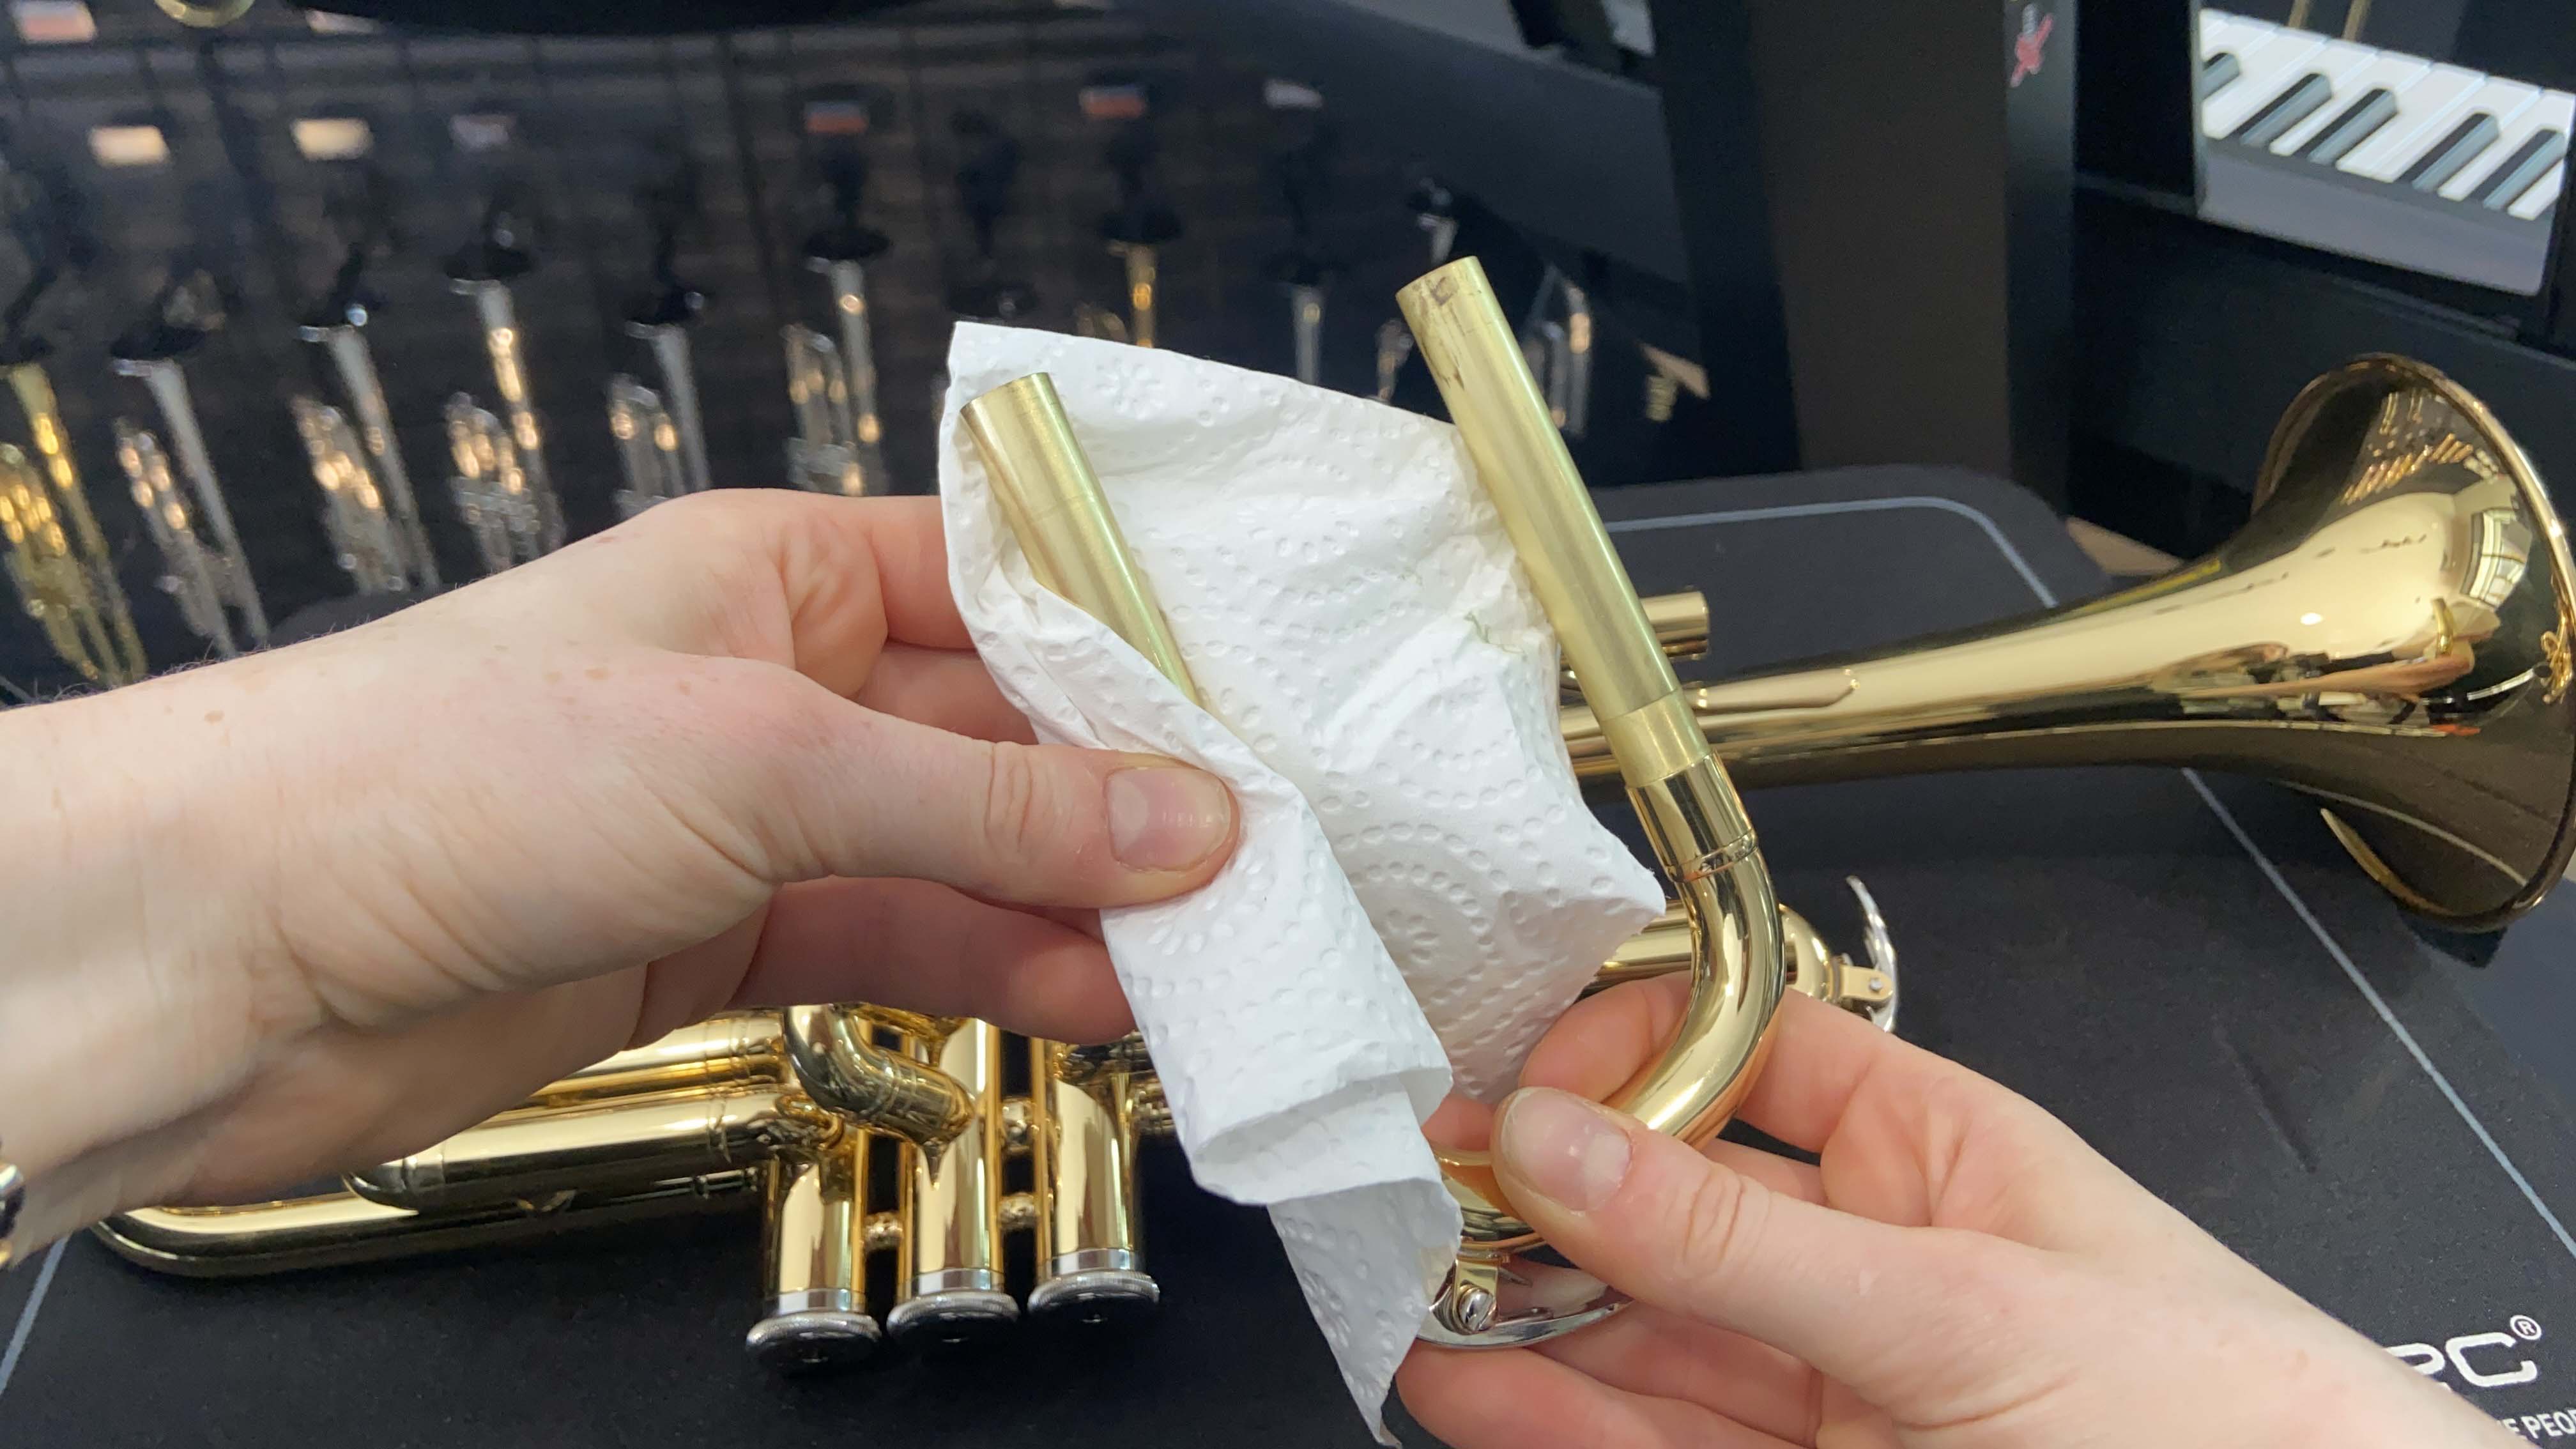 The trumpet's tuning slide has been removed and the grease is being removed with paper towel.